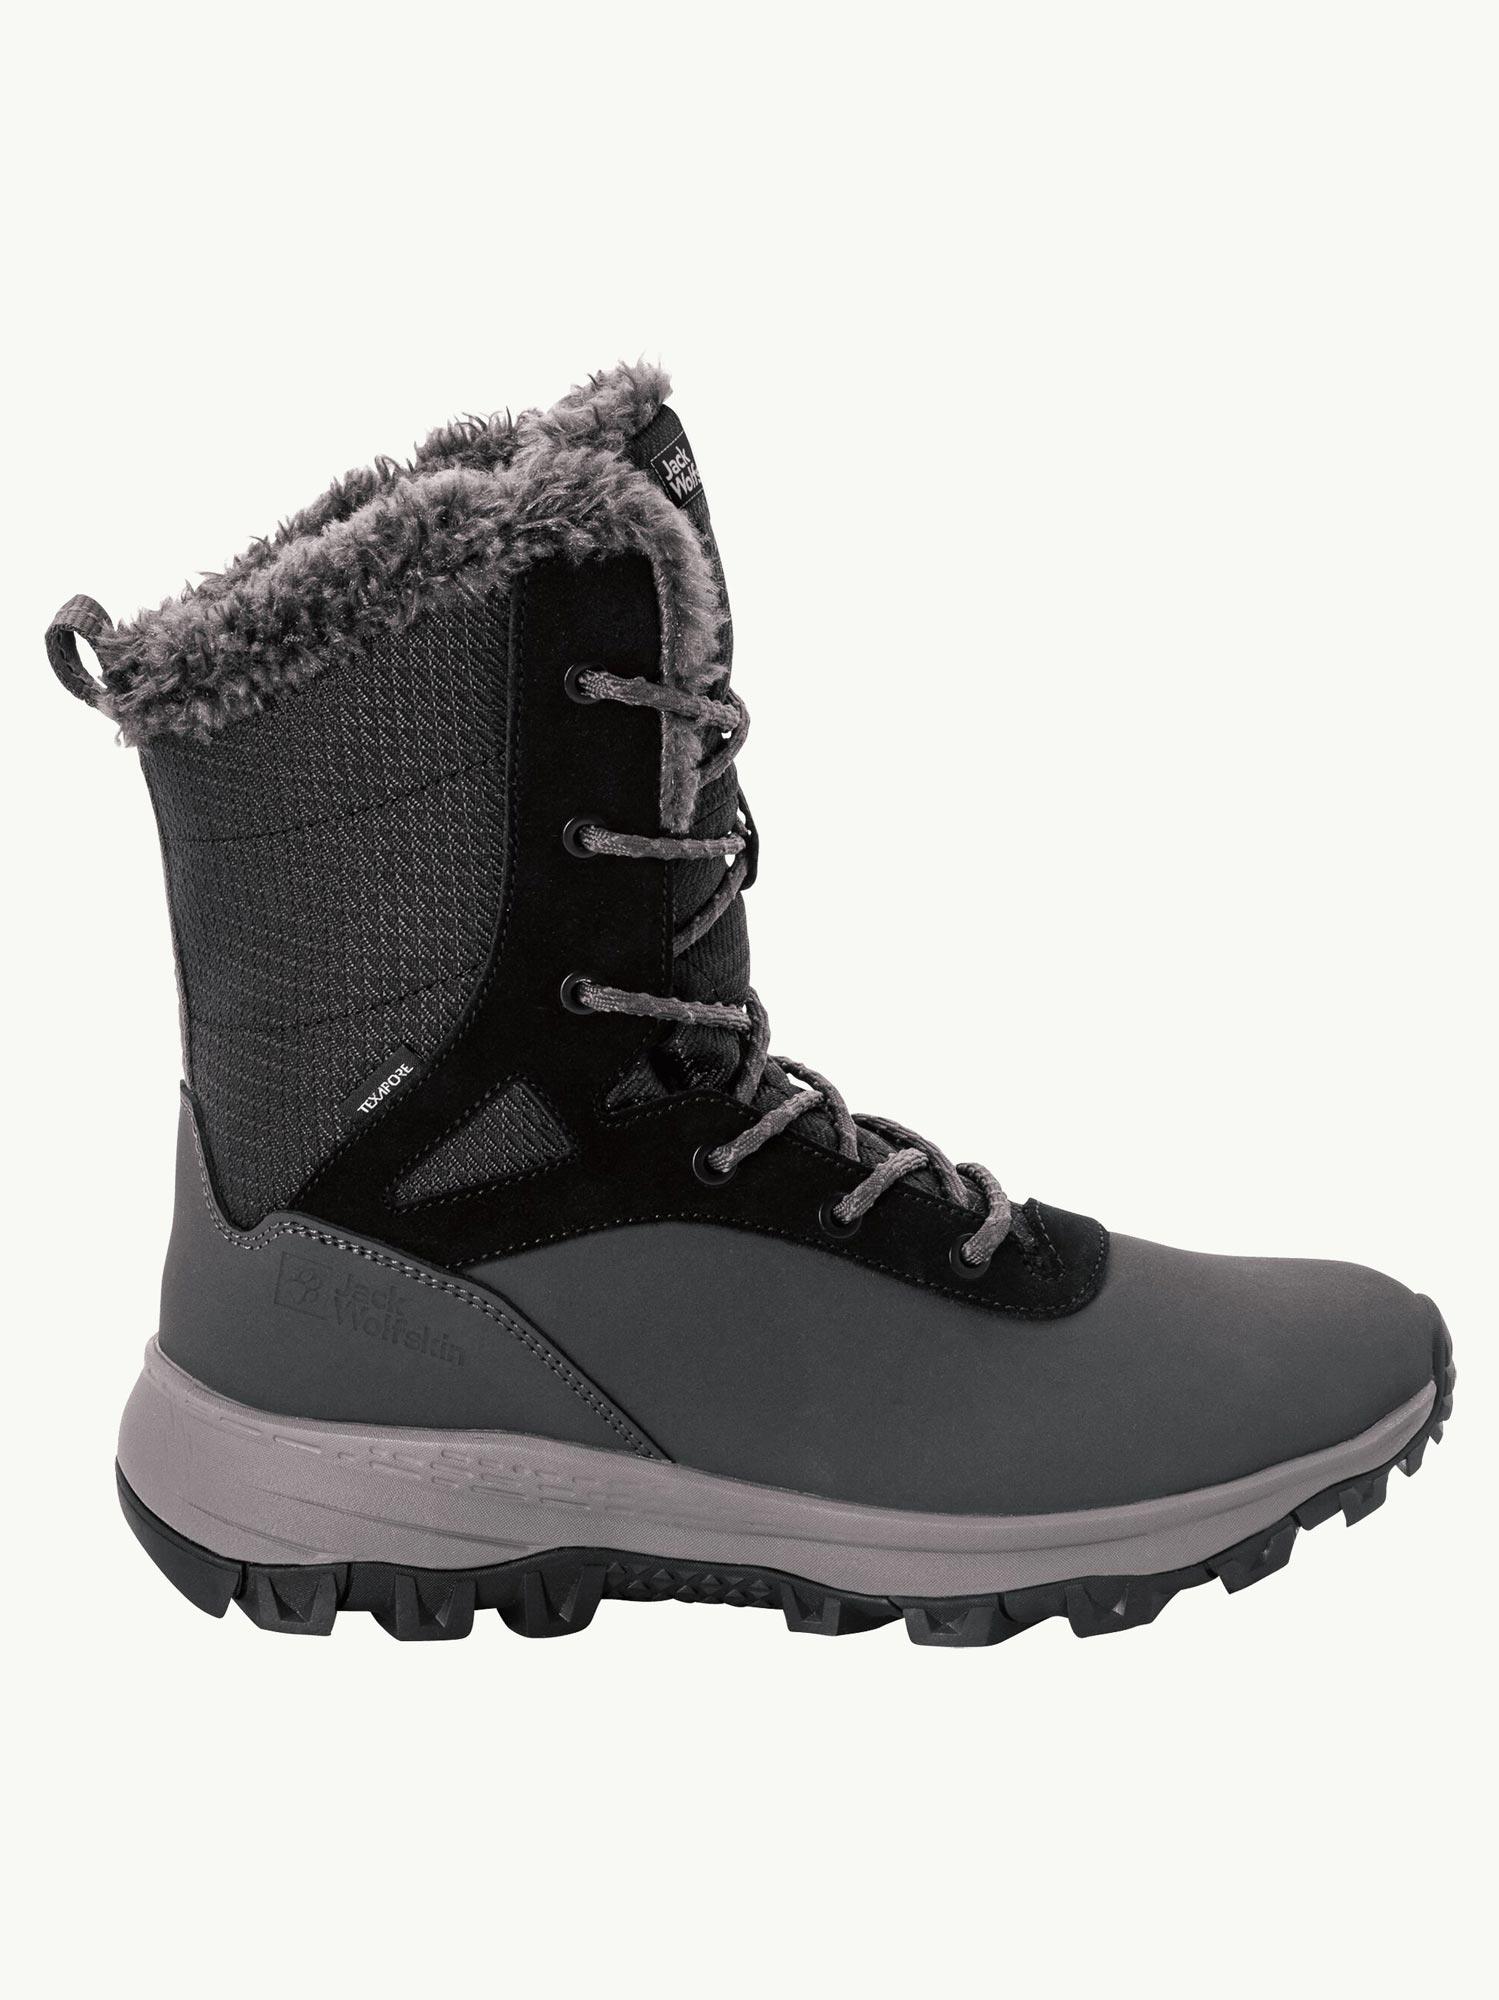 Selected image for JACK WOLFSKIN Ženske čizme EVERQUEST TEXAPORE SNOW HIGH W Boots sive